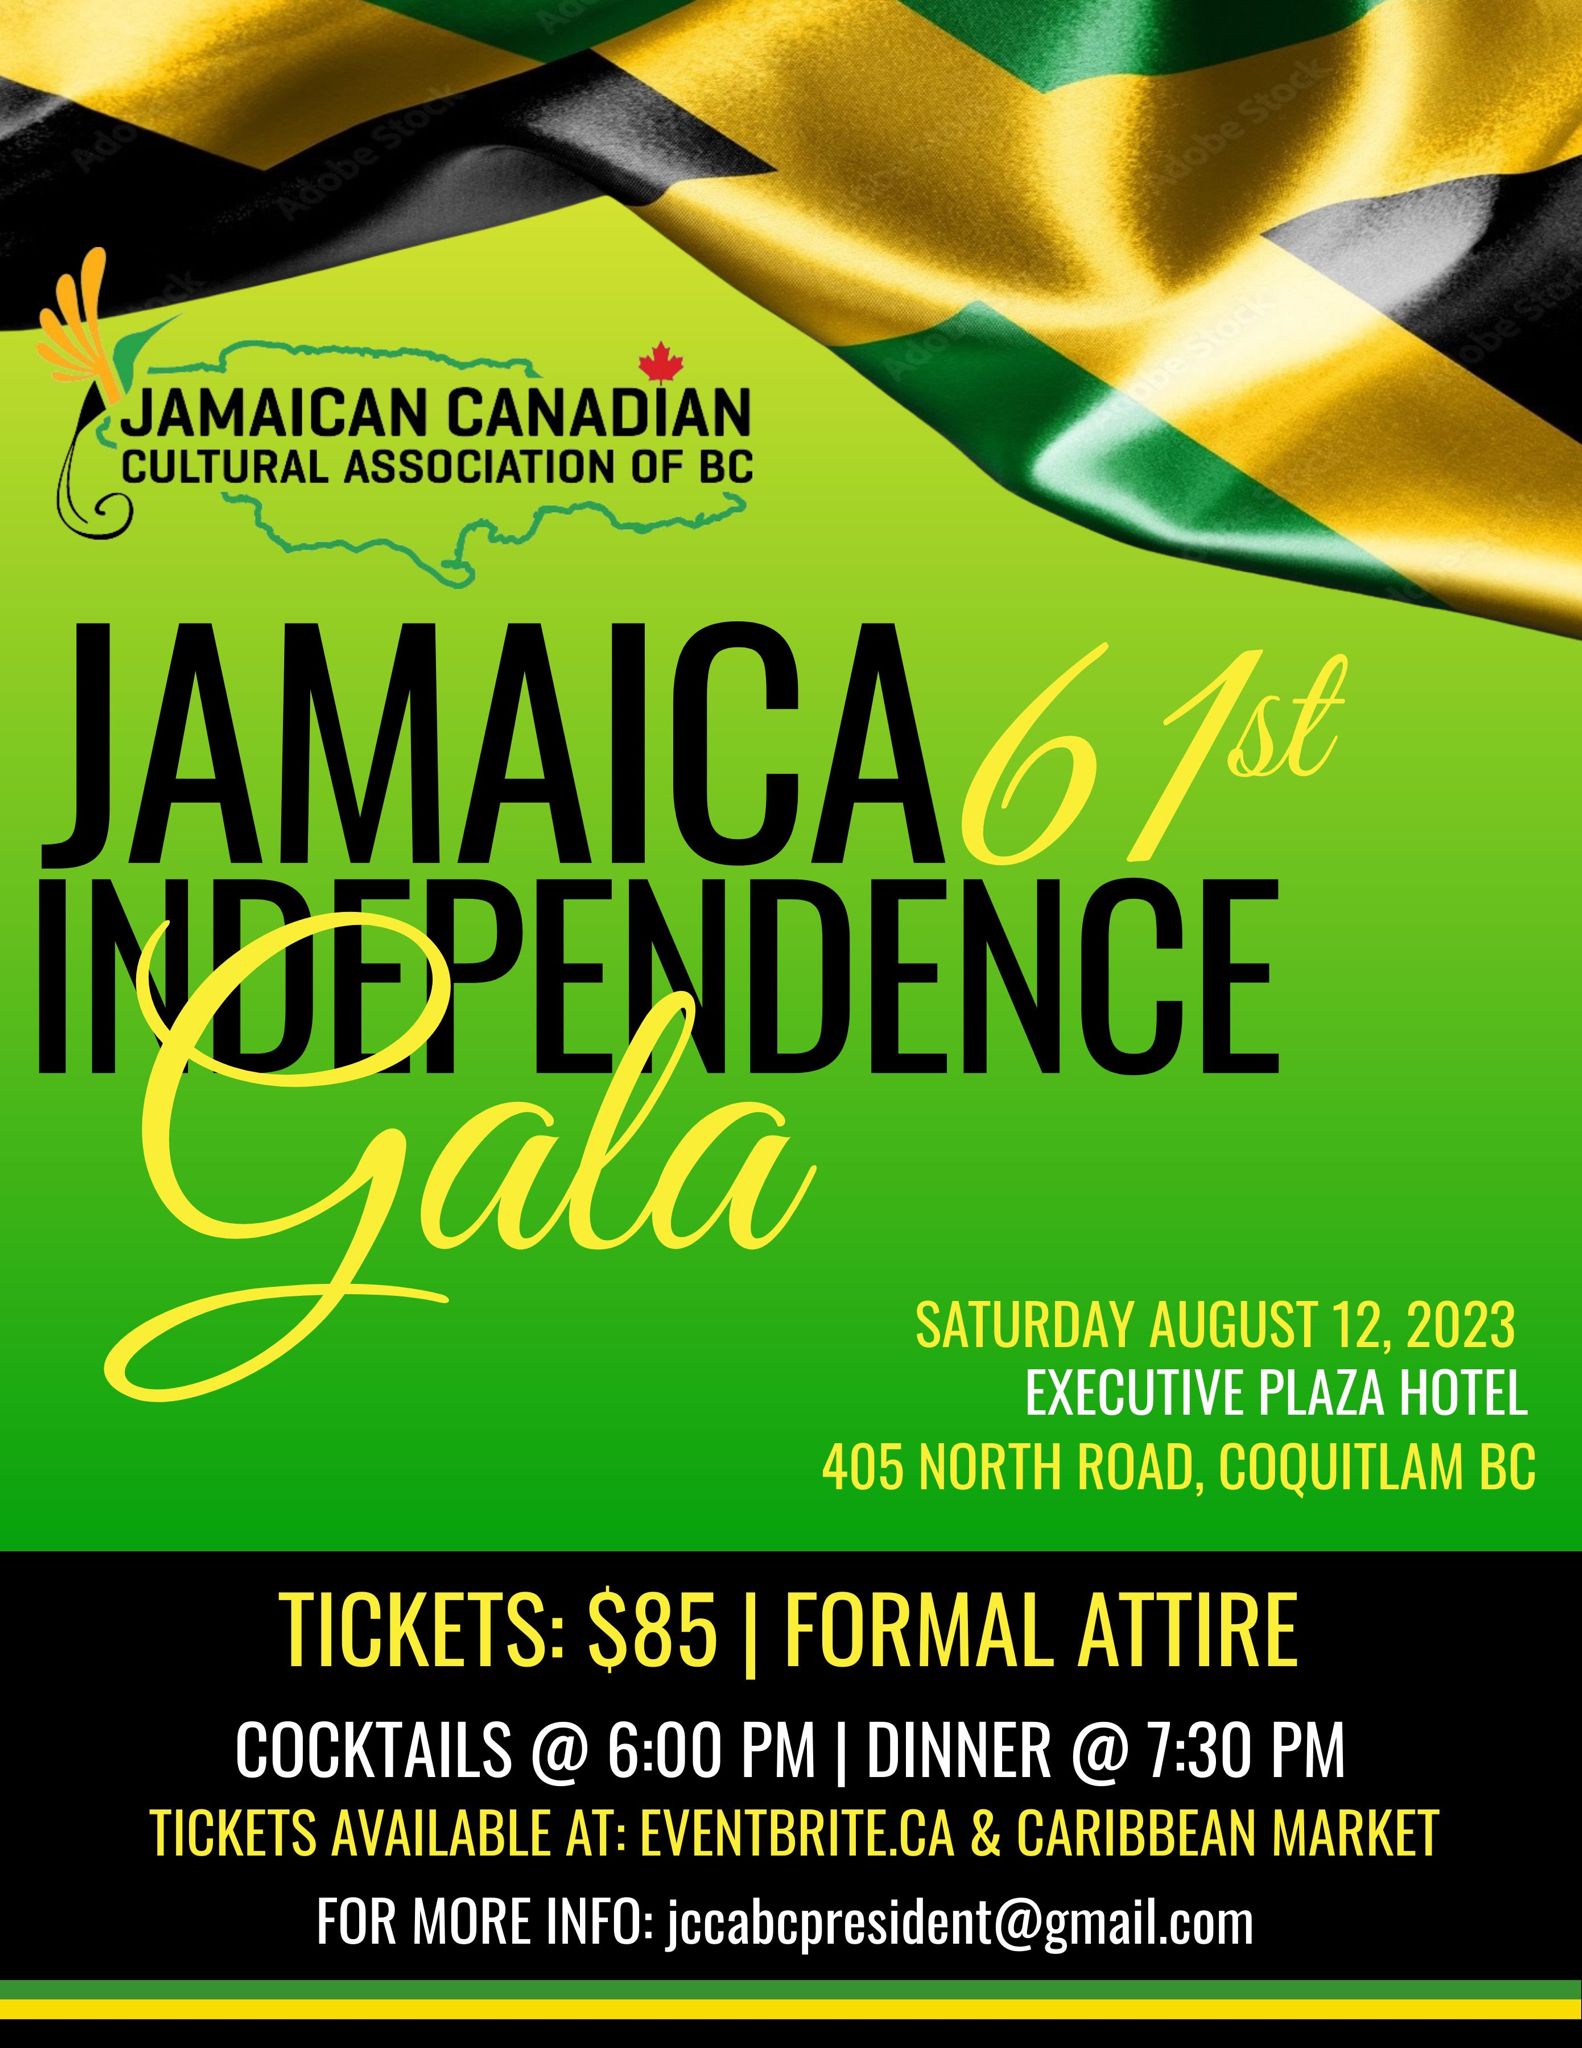 Jamaica 61st Independence Day